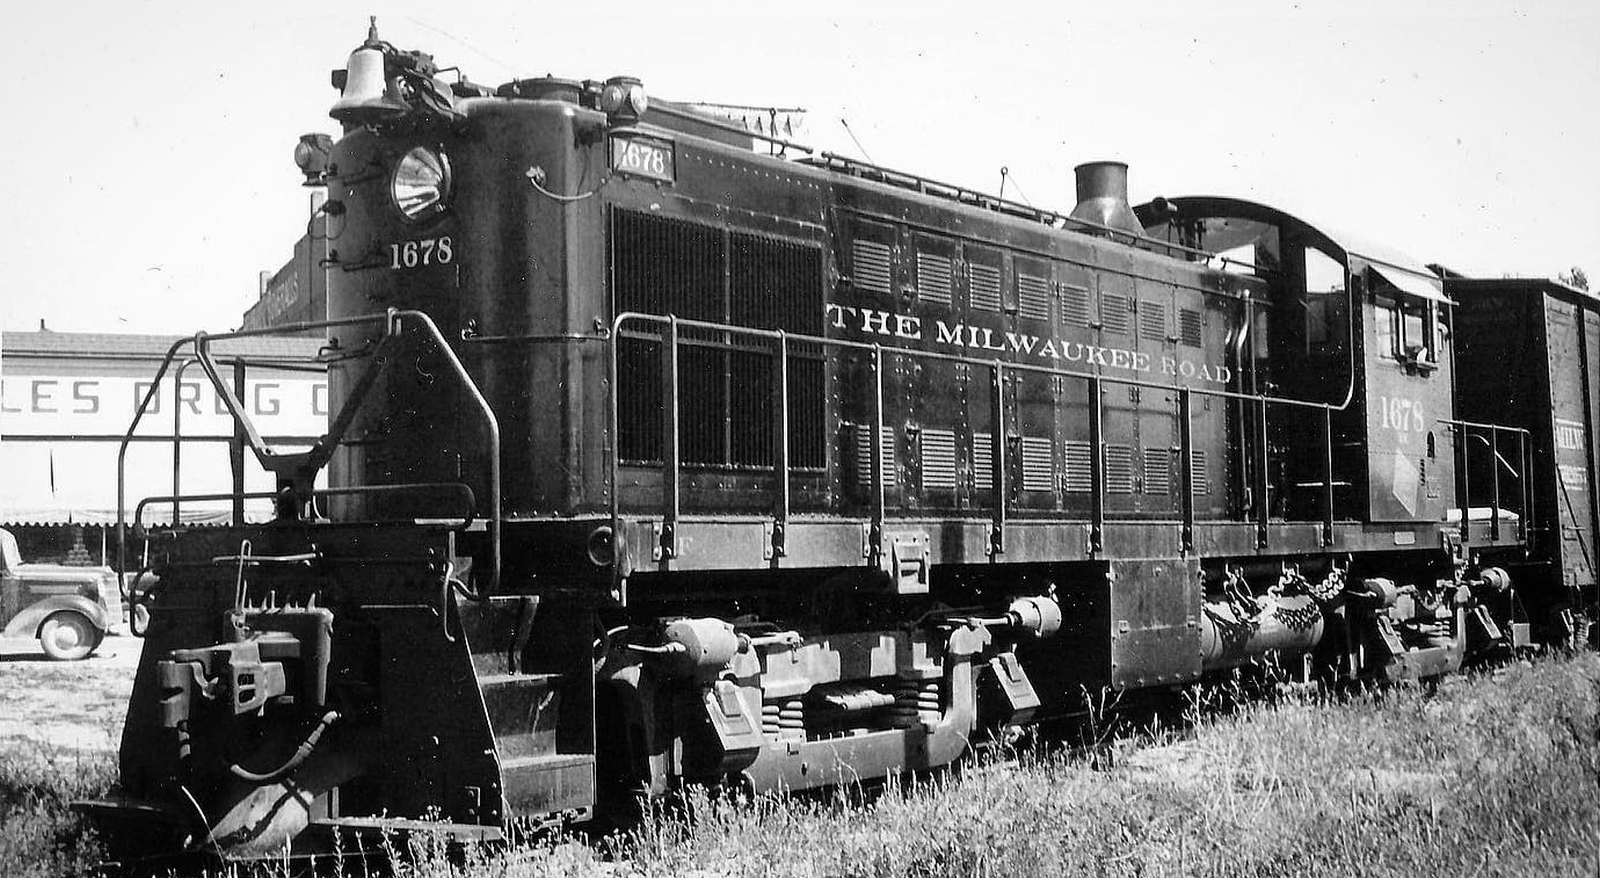 Milwaukee Road RS-1 No. 1678 before being drafted into the US Army in 1943